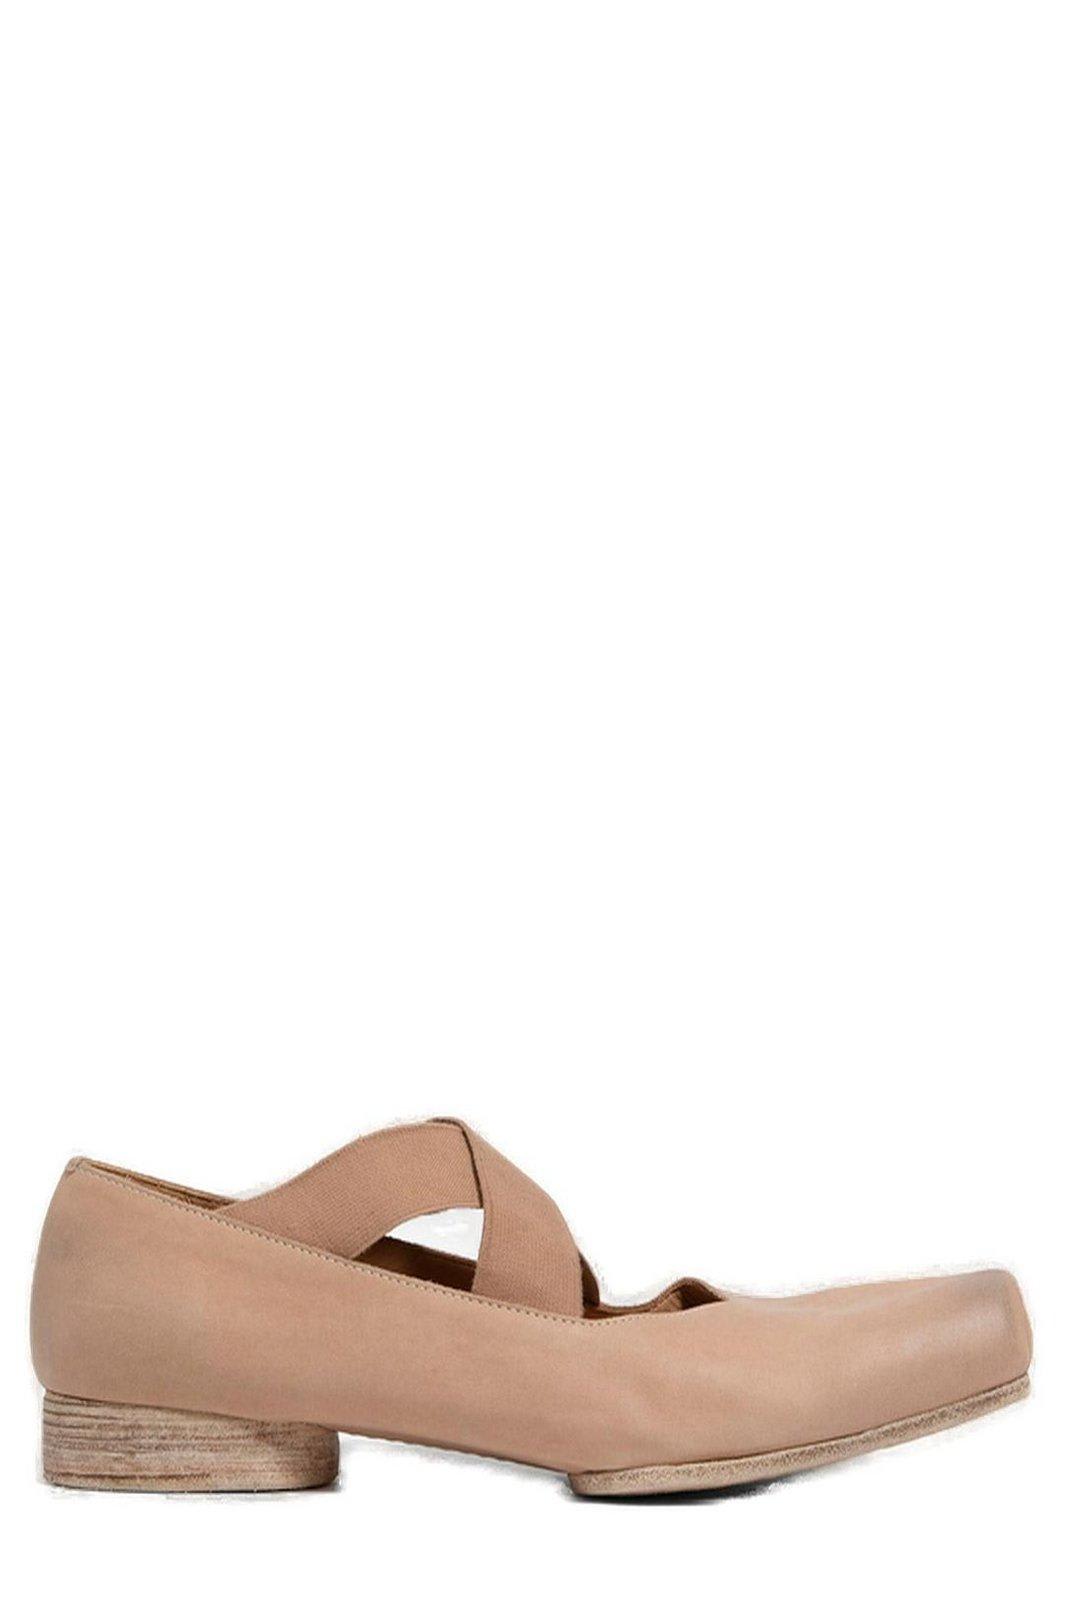 Shop Uma Wang Cross-strapped Ballet Shoes In Rose